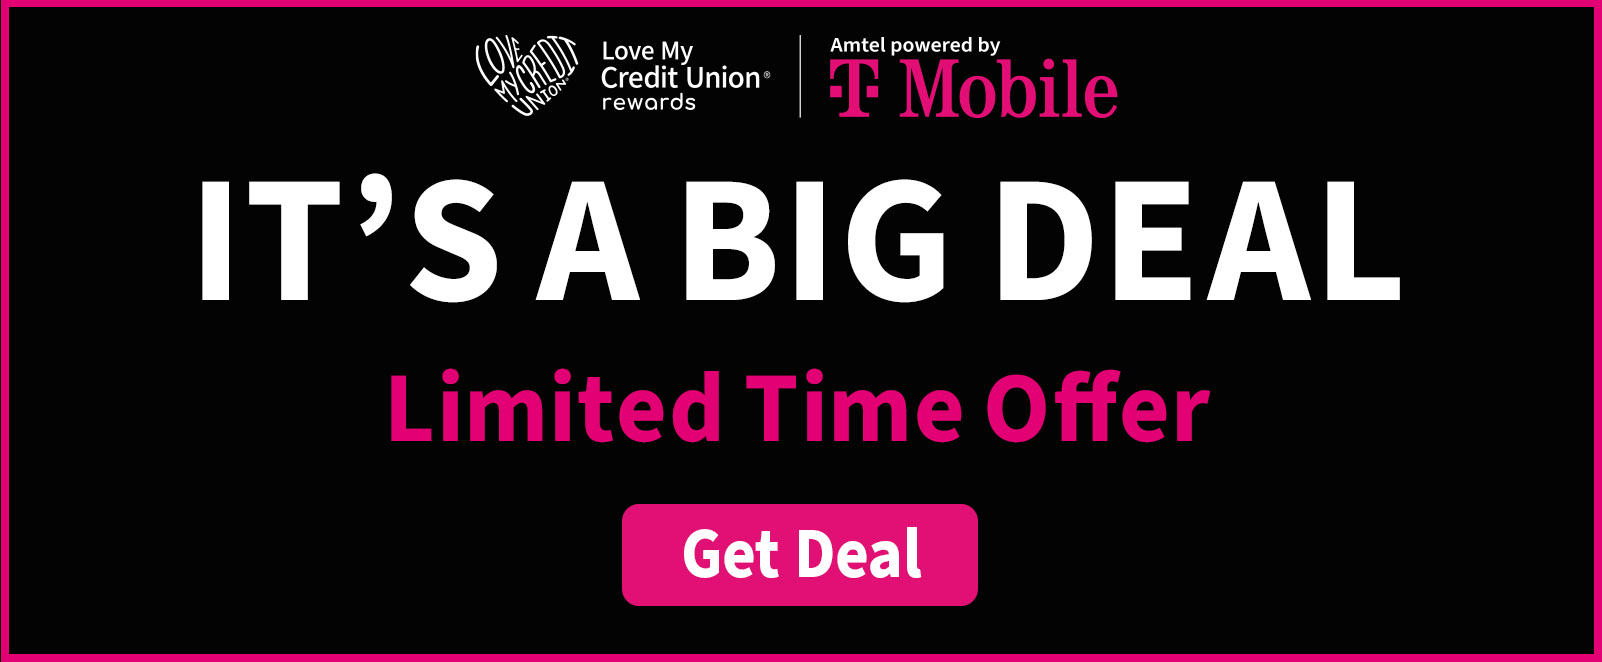 Get $50 When You Switch To T-Mobile